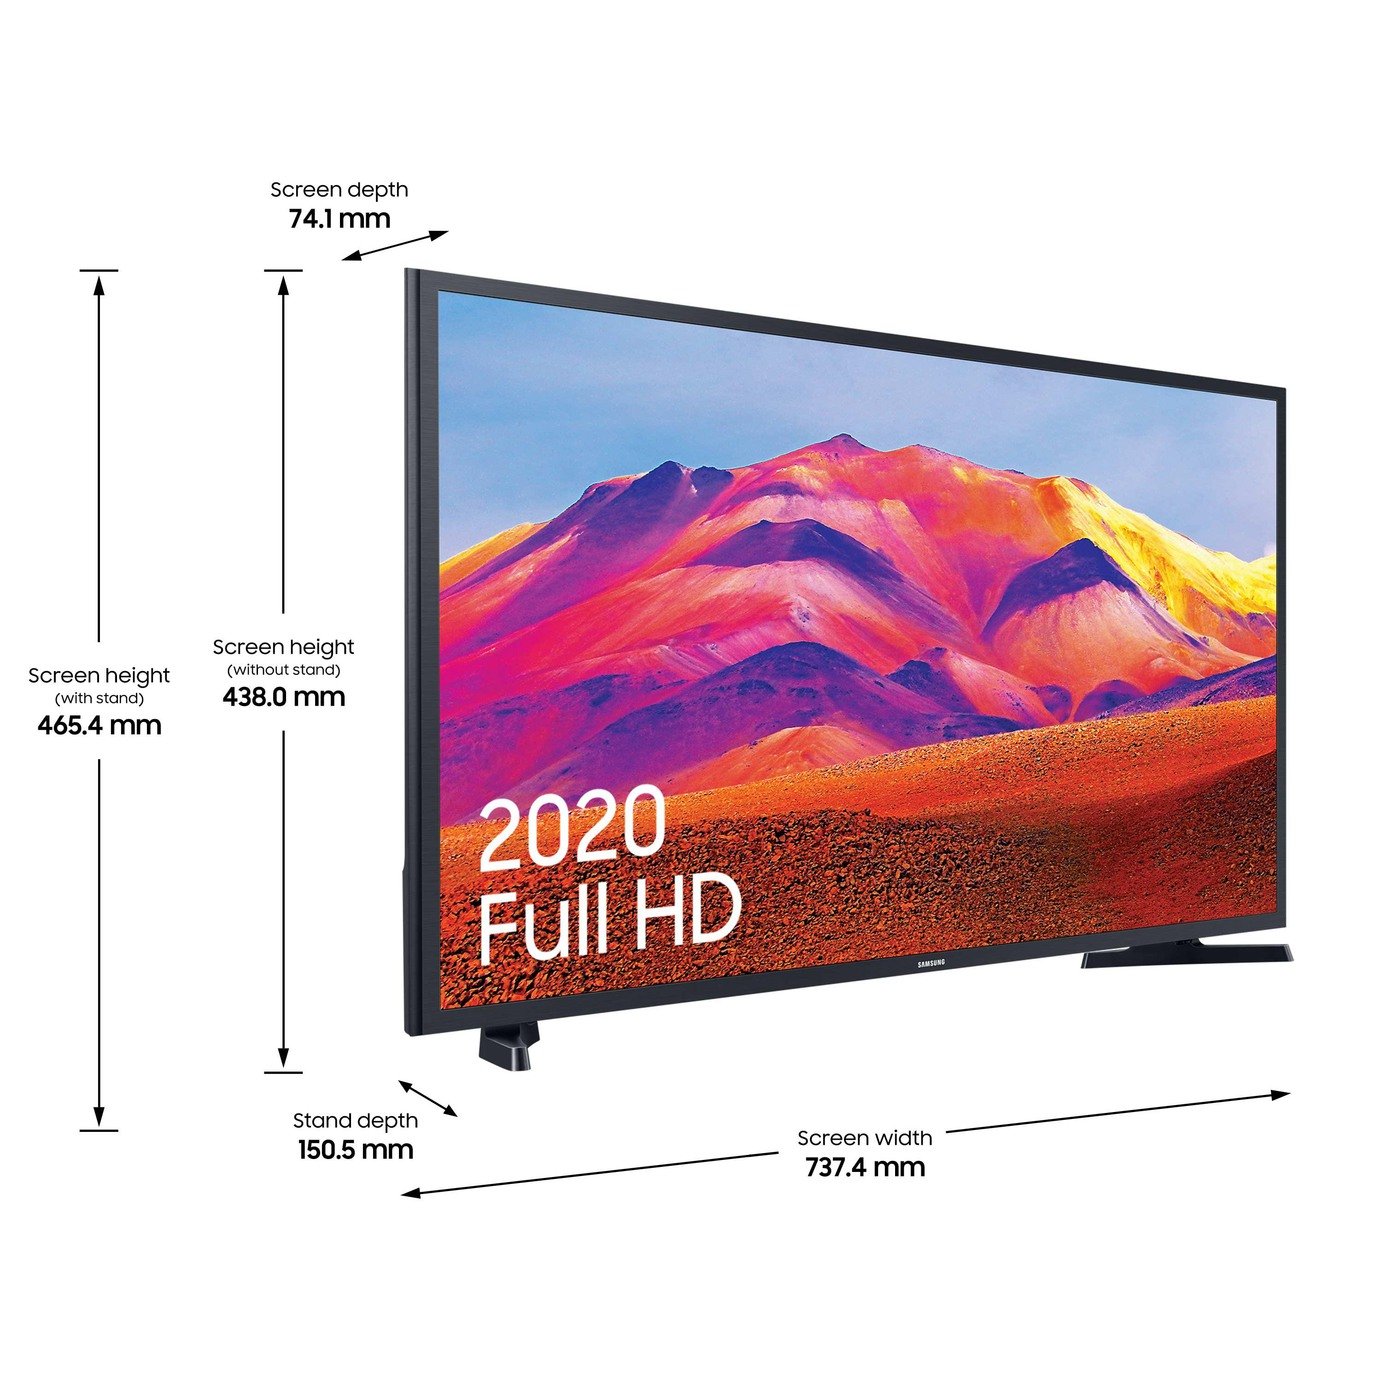 Samsung 32 Inch UE32T5300 Smart Full HD TV Review